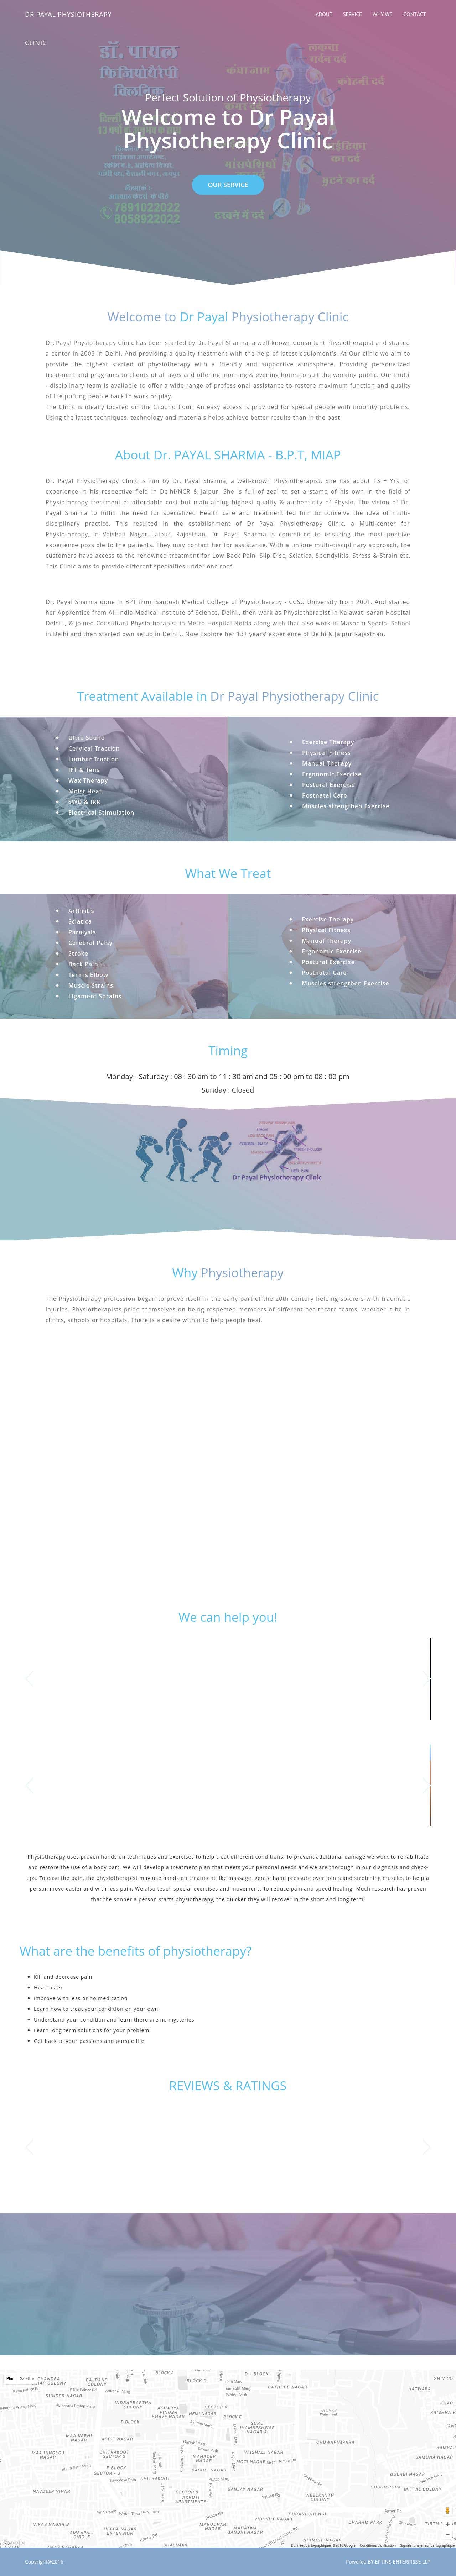 Website for "Dr Payal Physiotherapy"